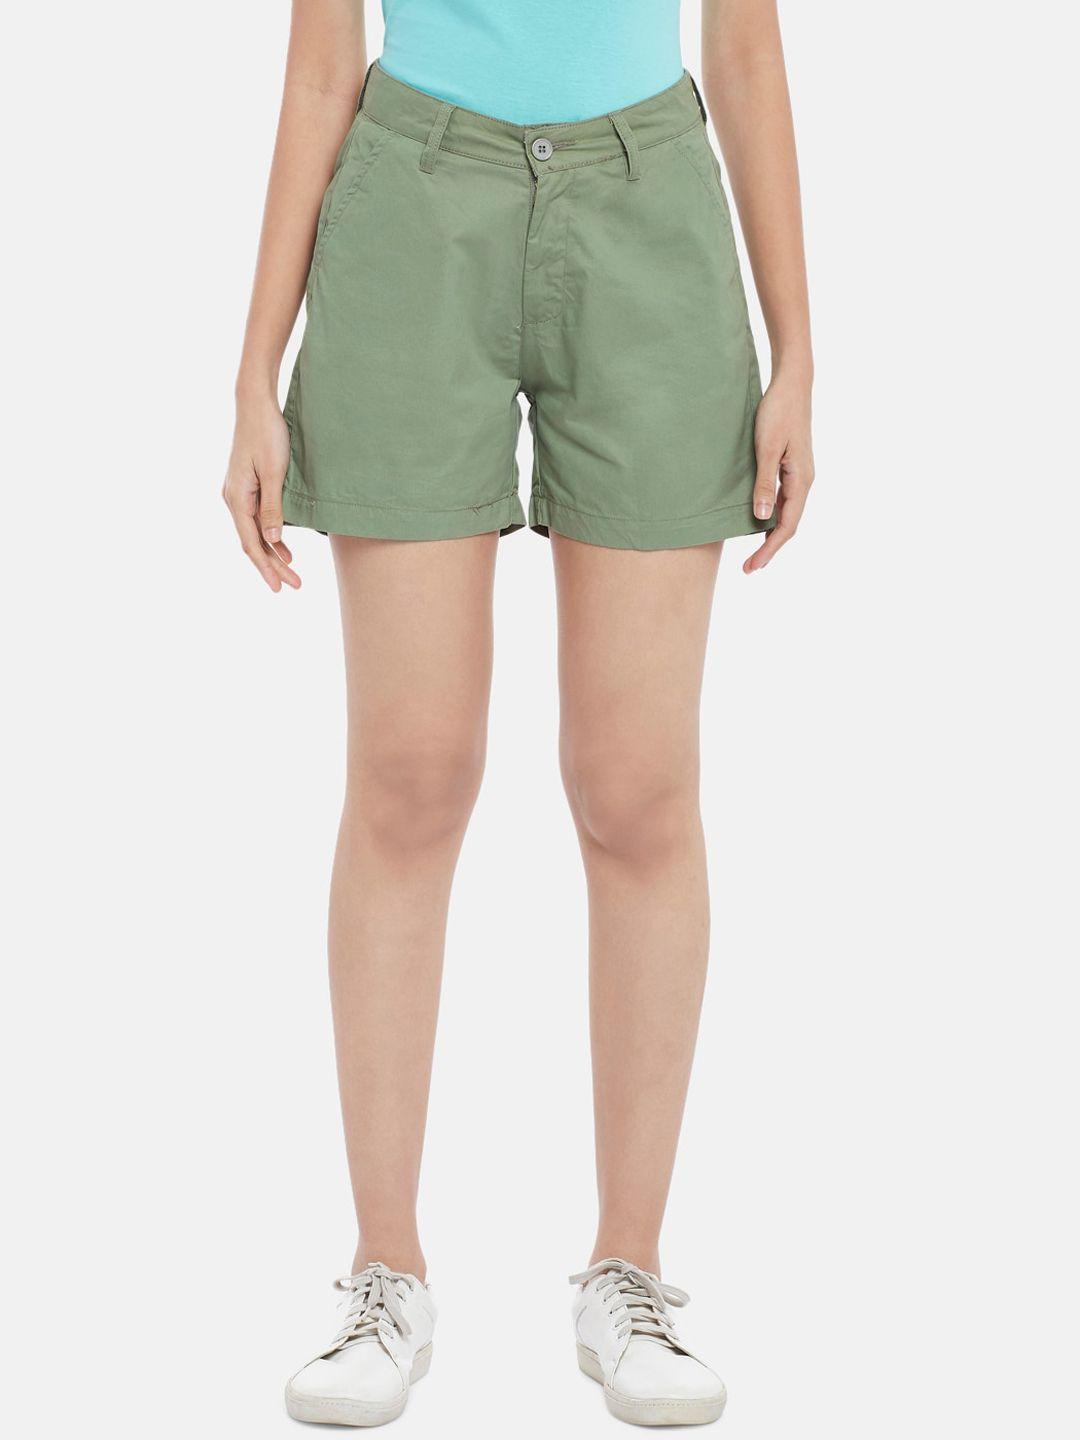 honey-by-pantaloons-women-olive-green-solid-shorts